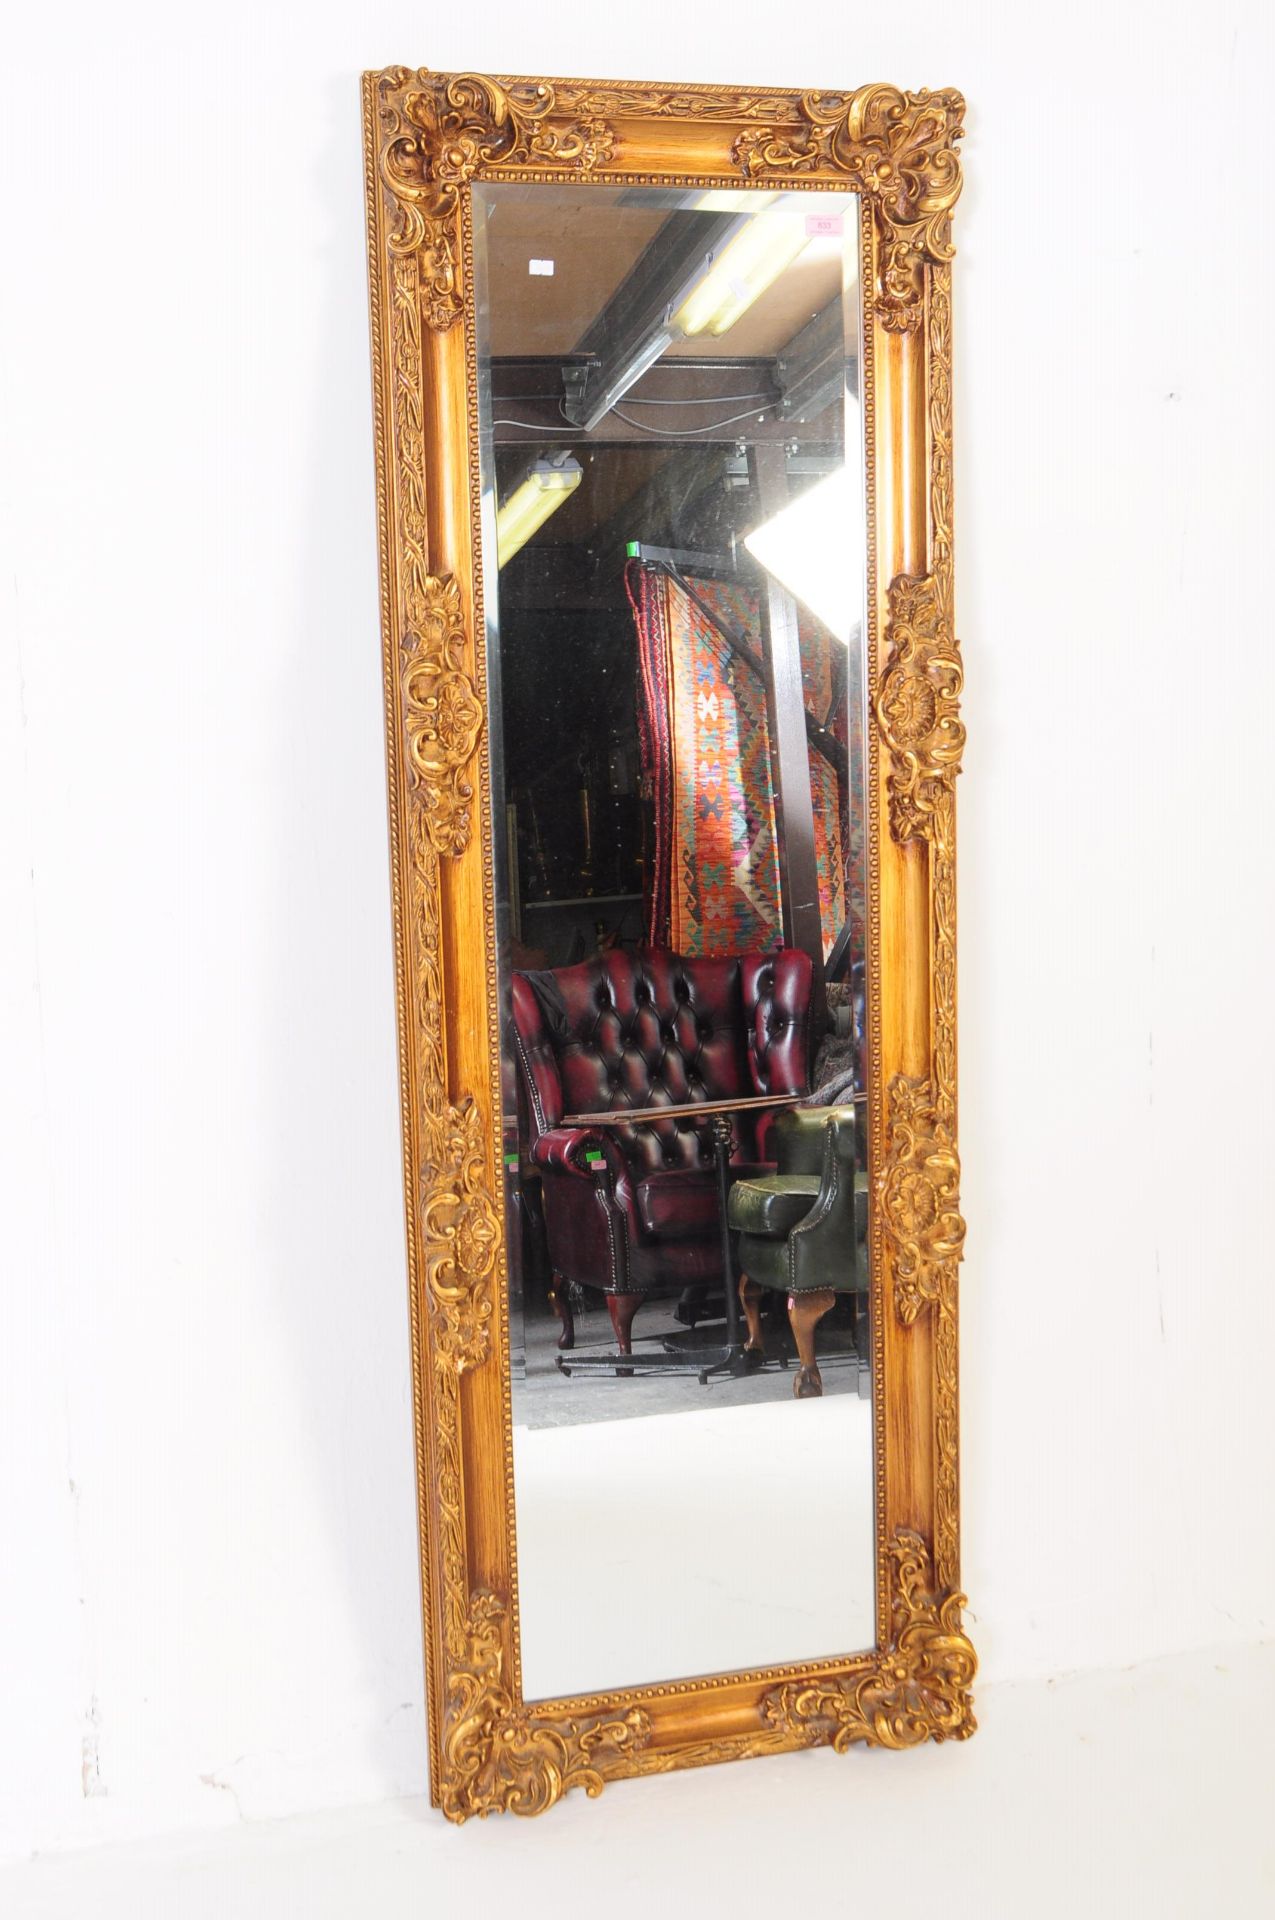 LARGE CONTEMPORARY FRENCH LOUIS XVI STYLE GILT MIRROR - Image 2 of 4